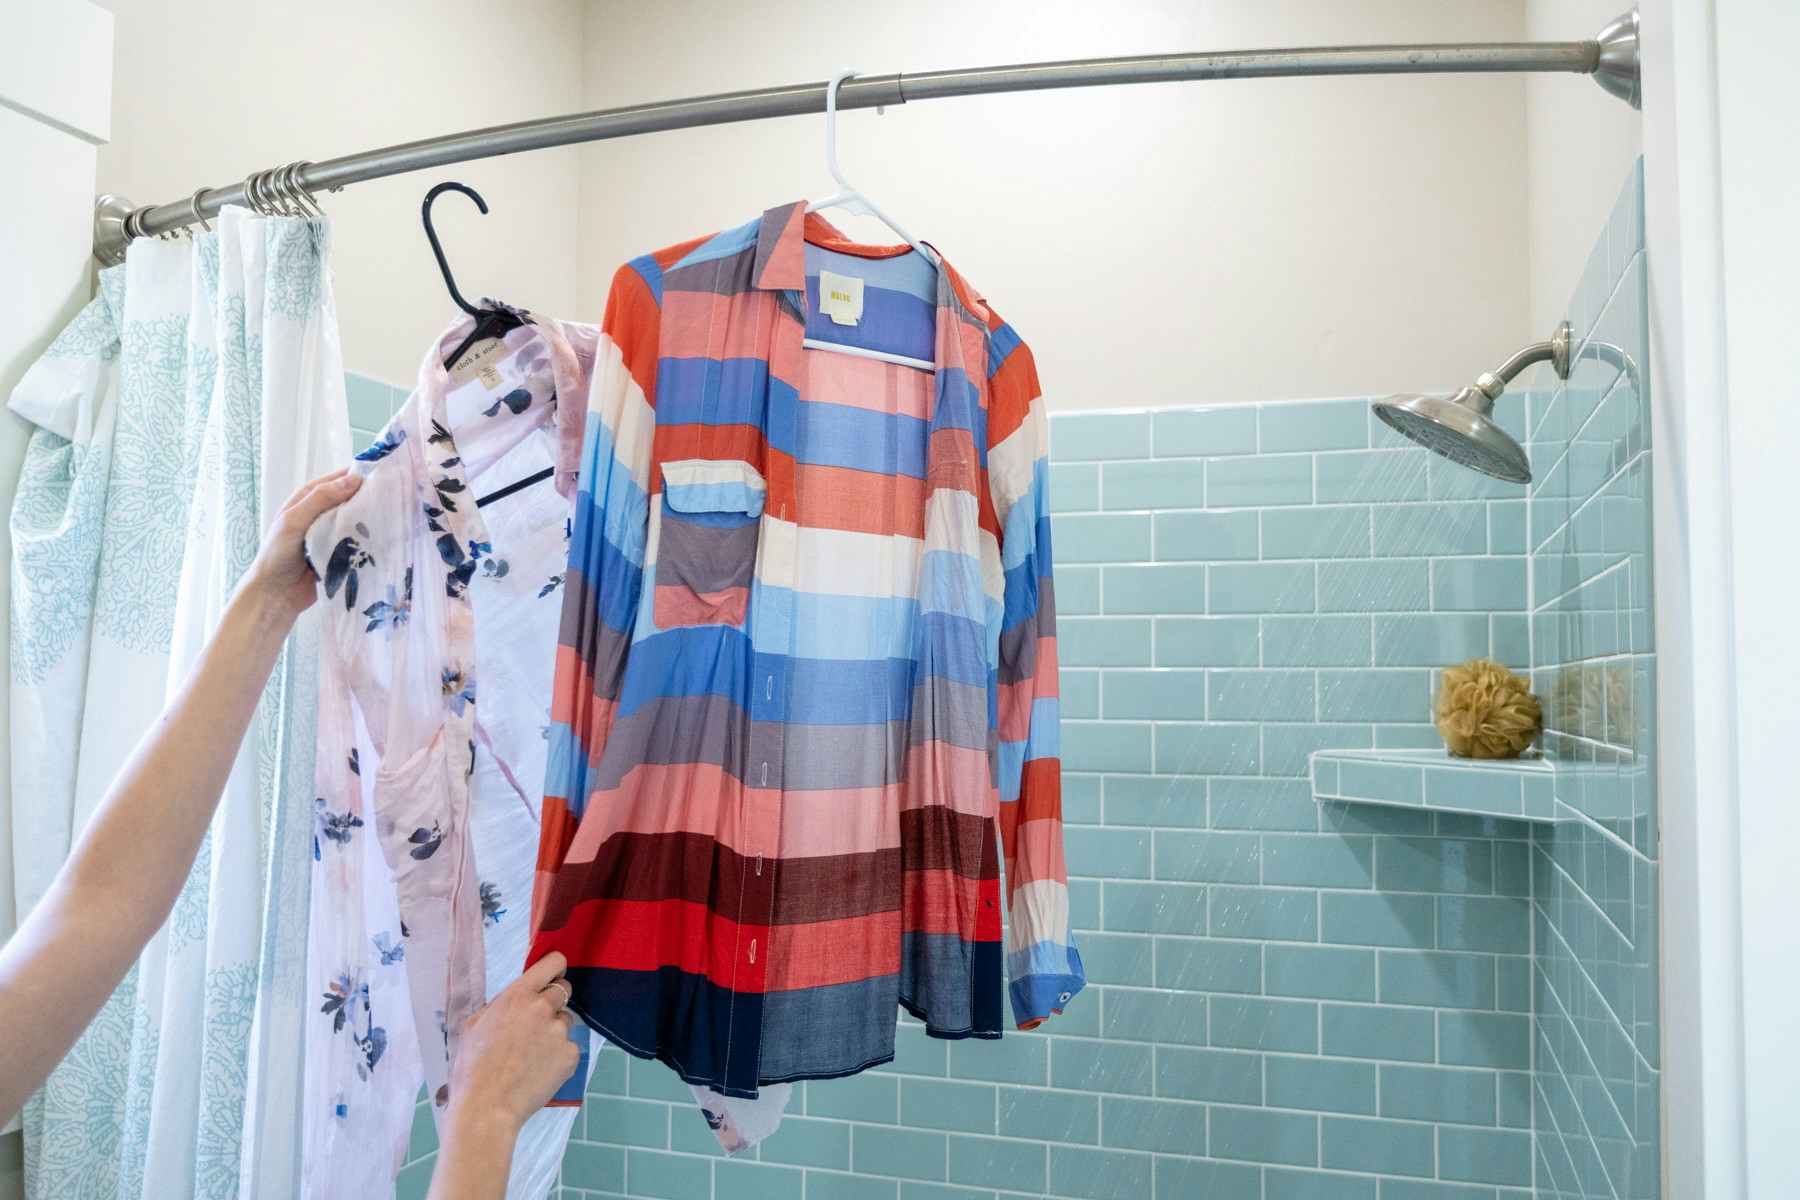 Wrinkled shirts being hung near a running shower